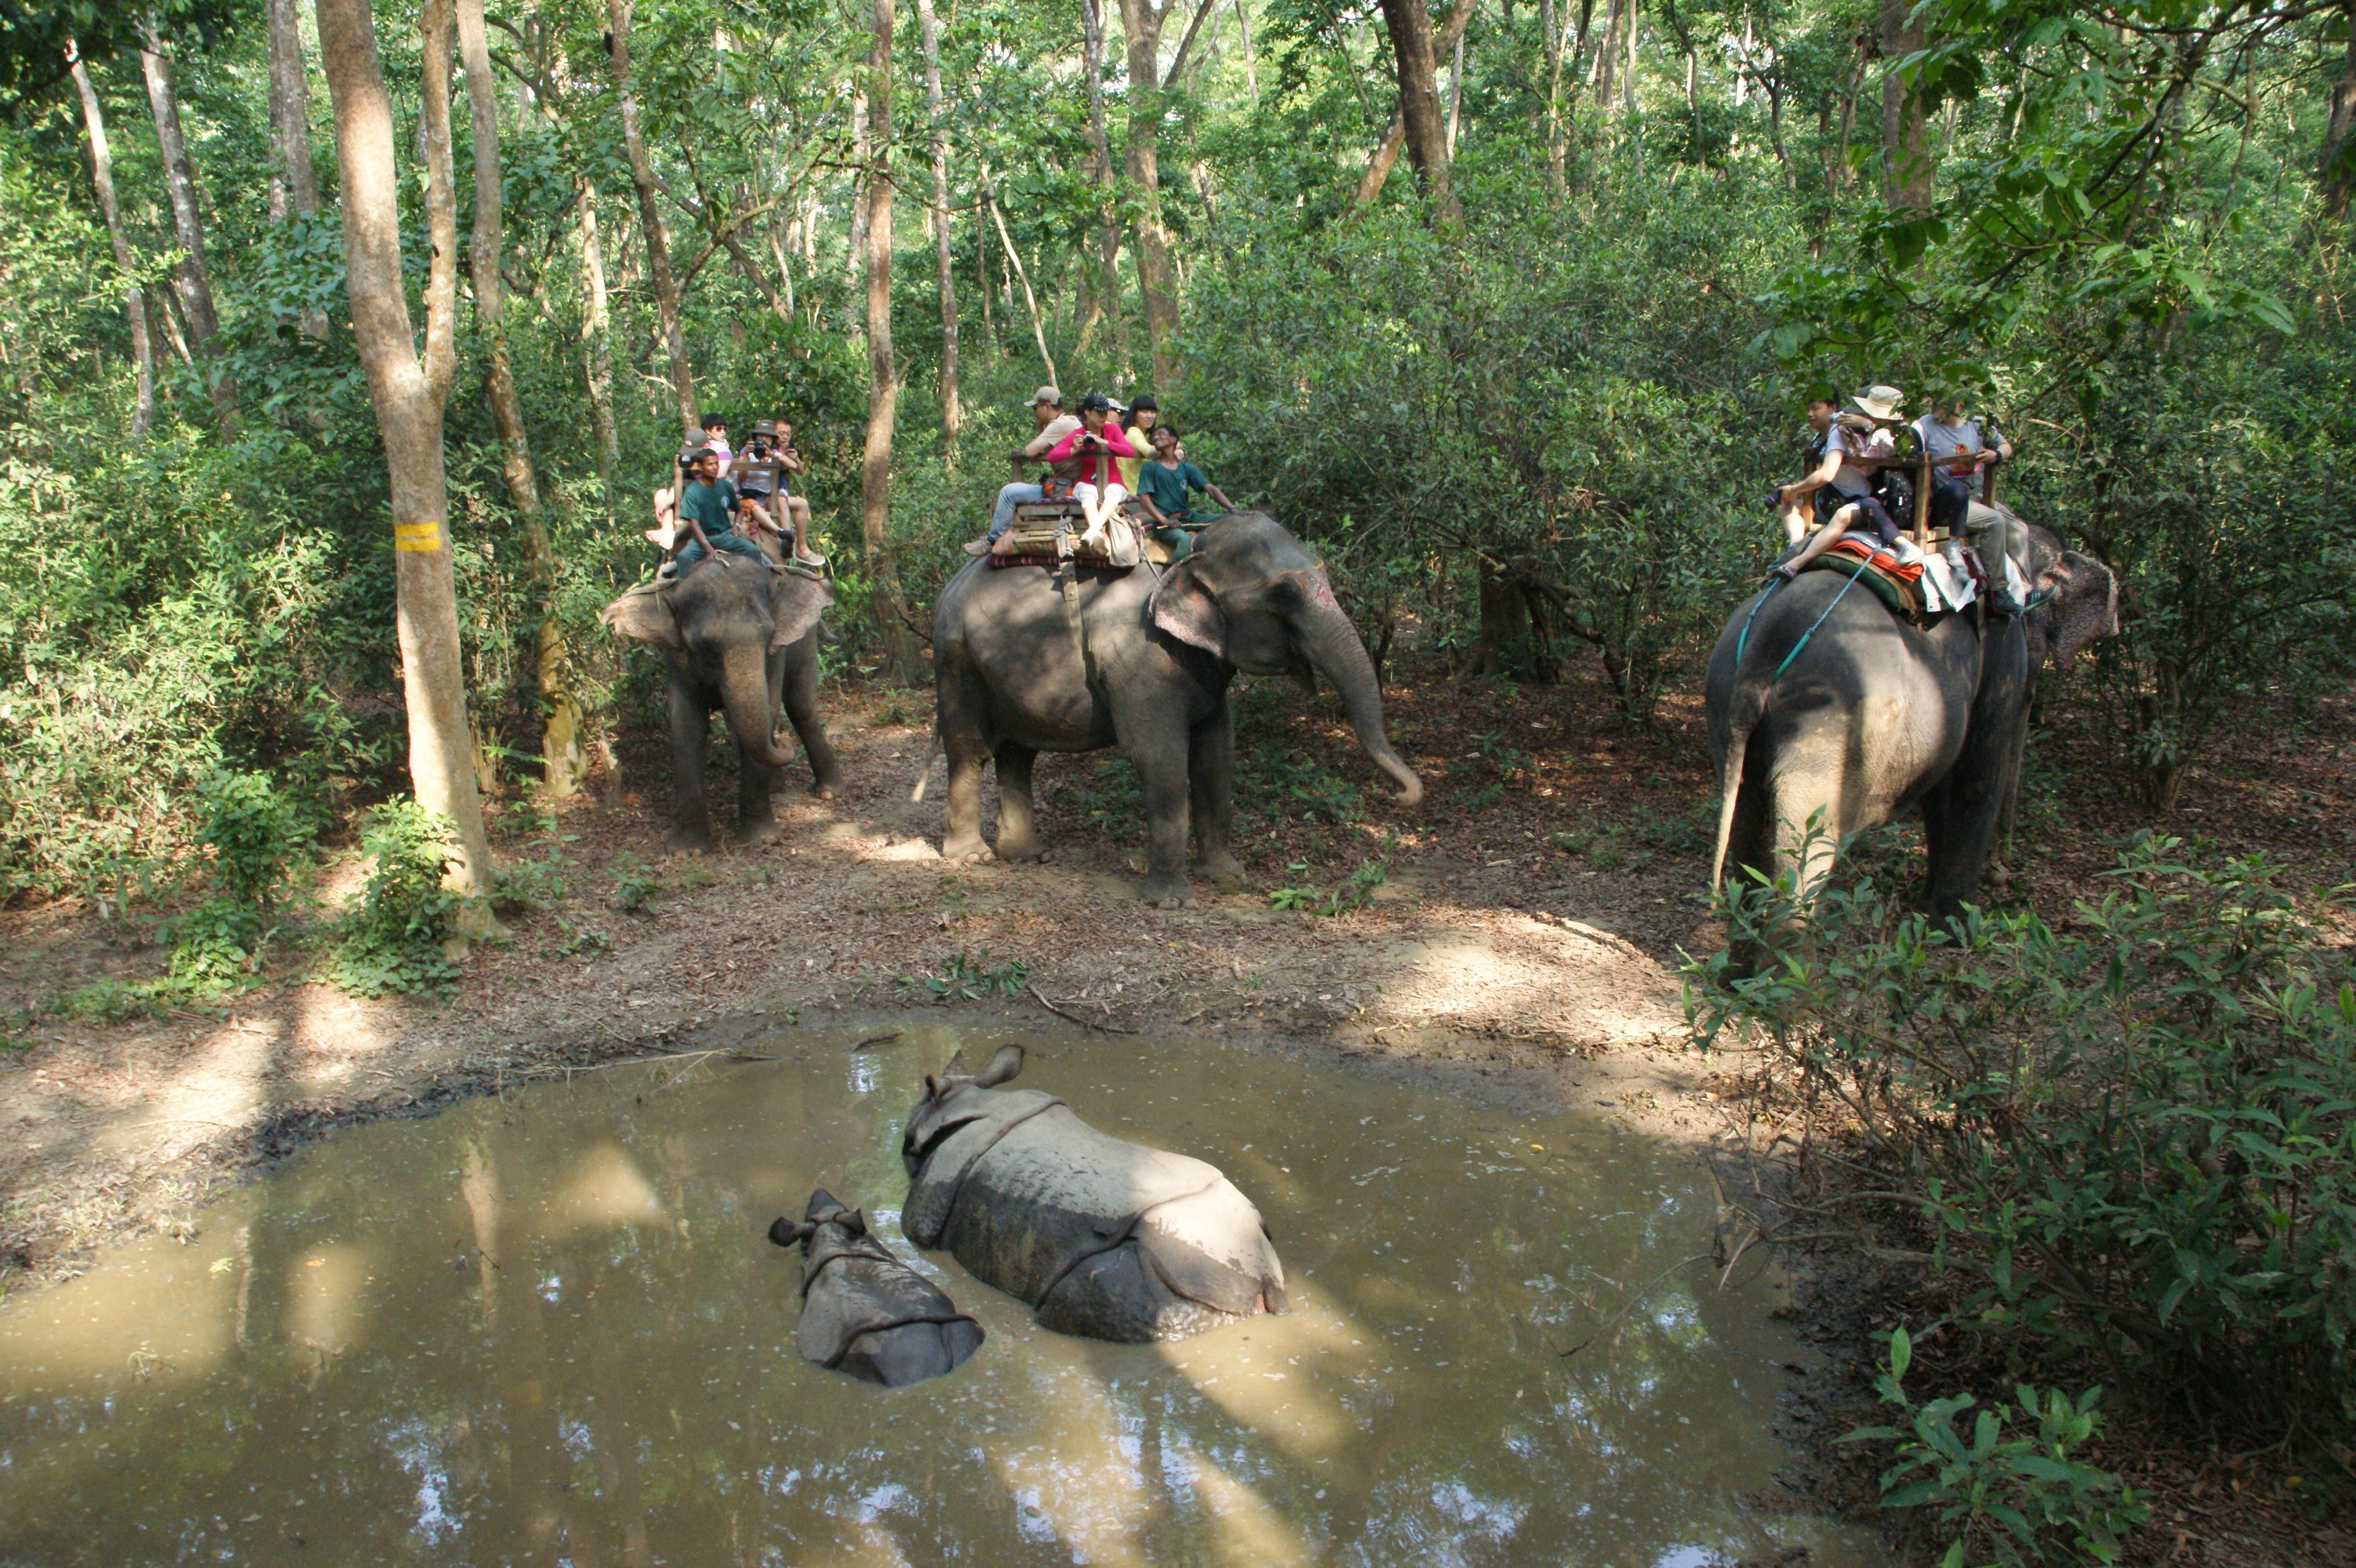 people riding the elephants in the forest during day time